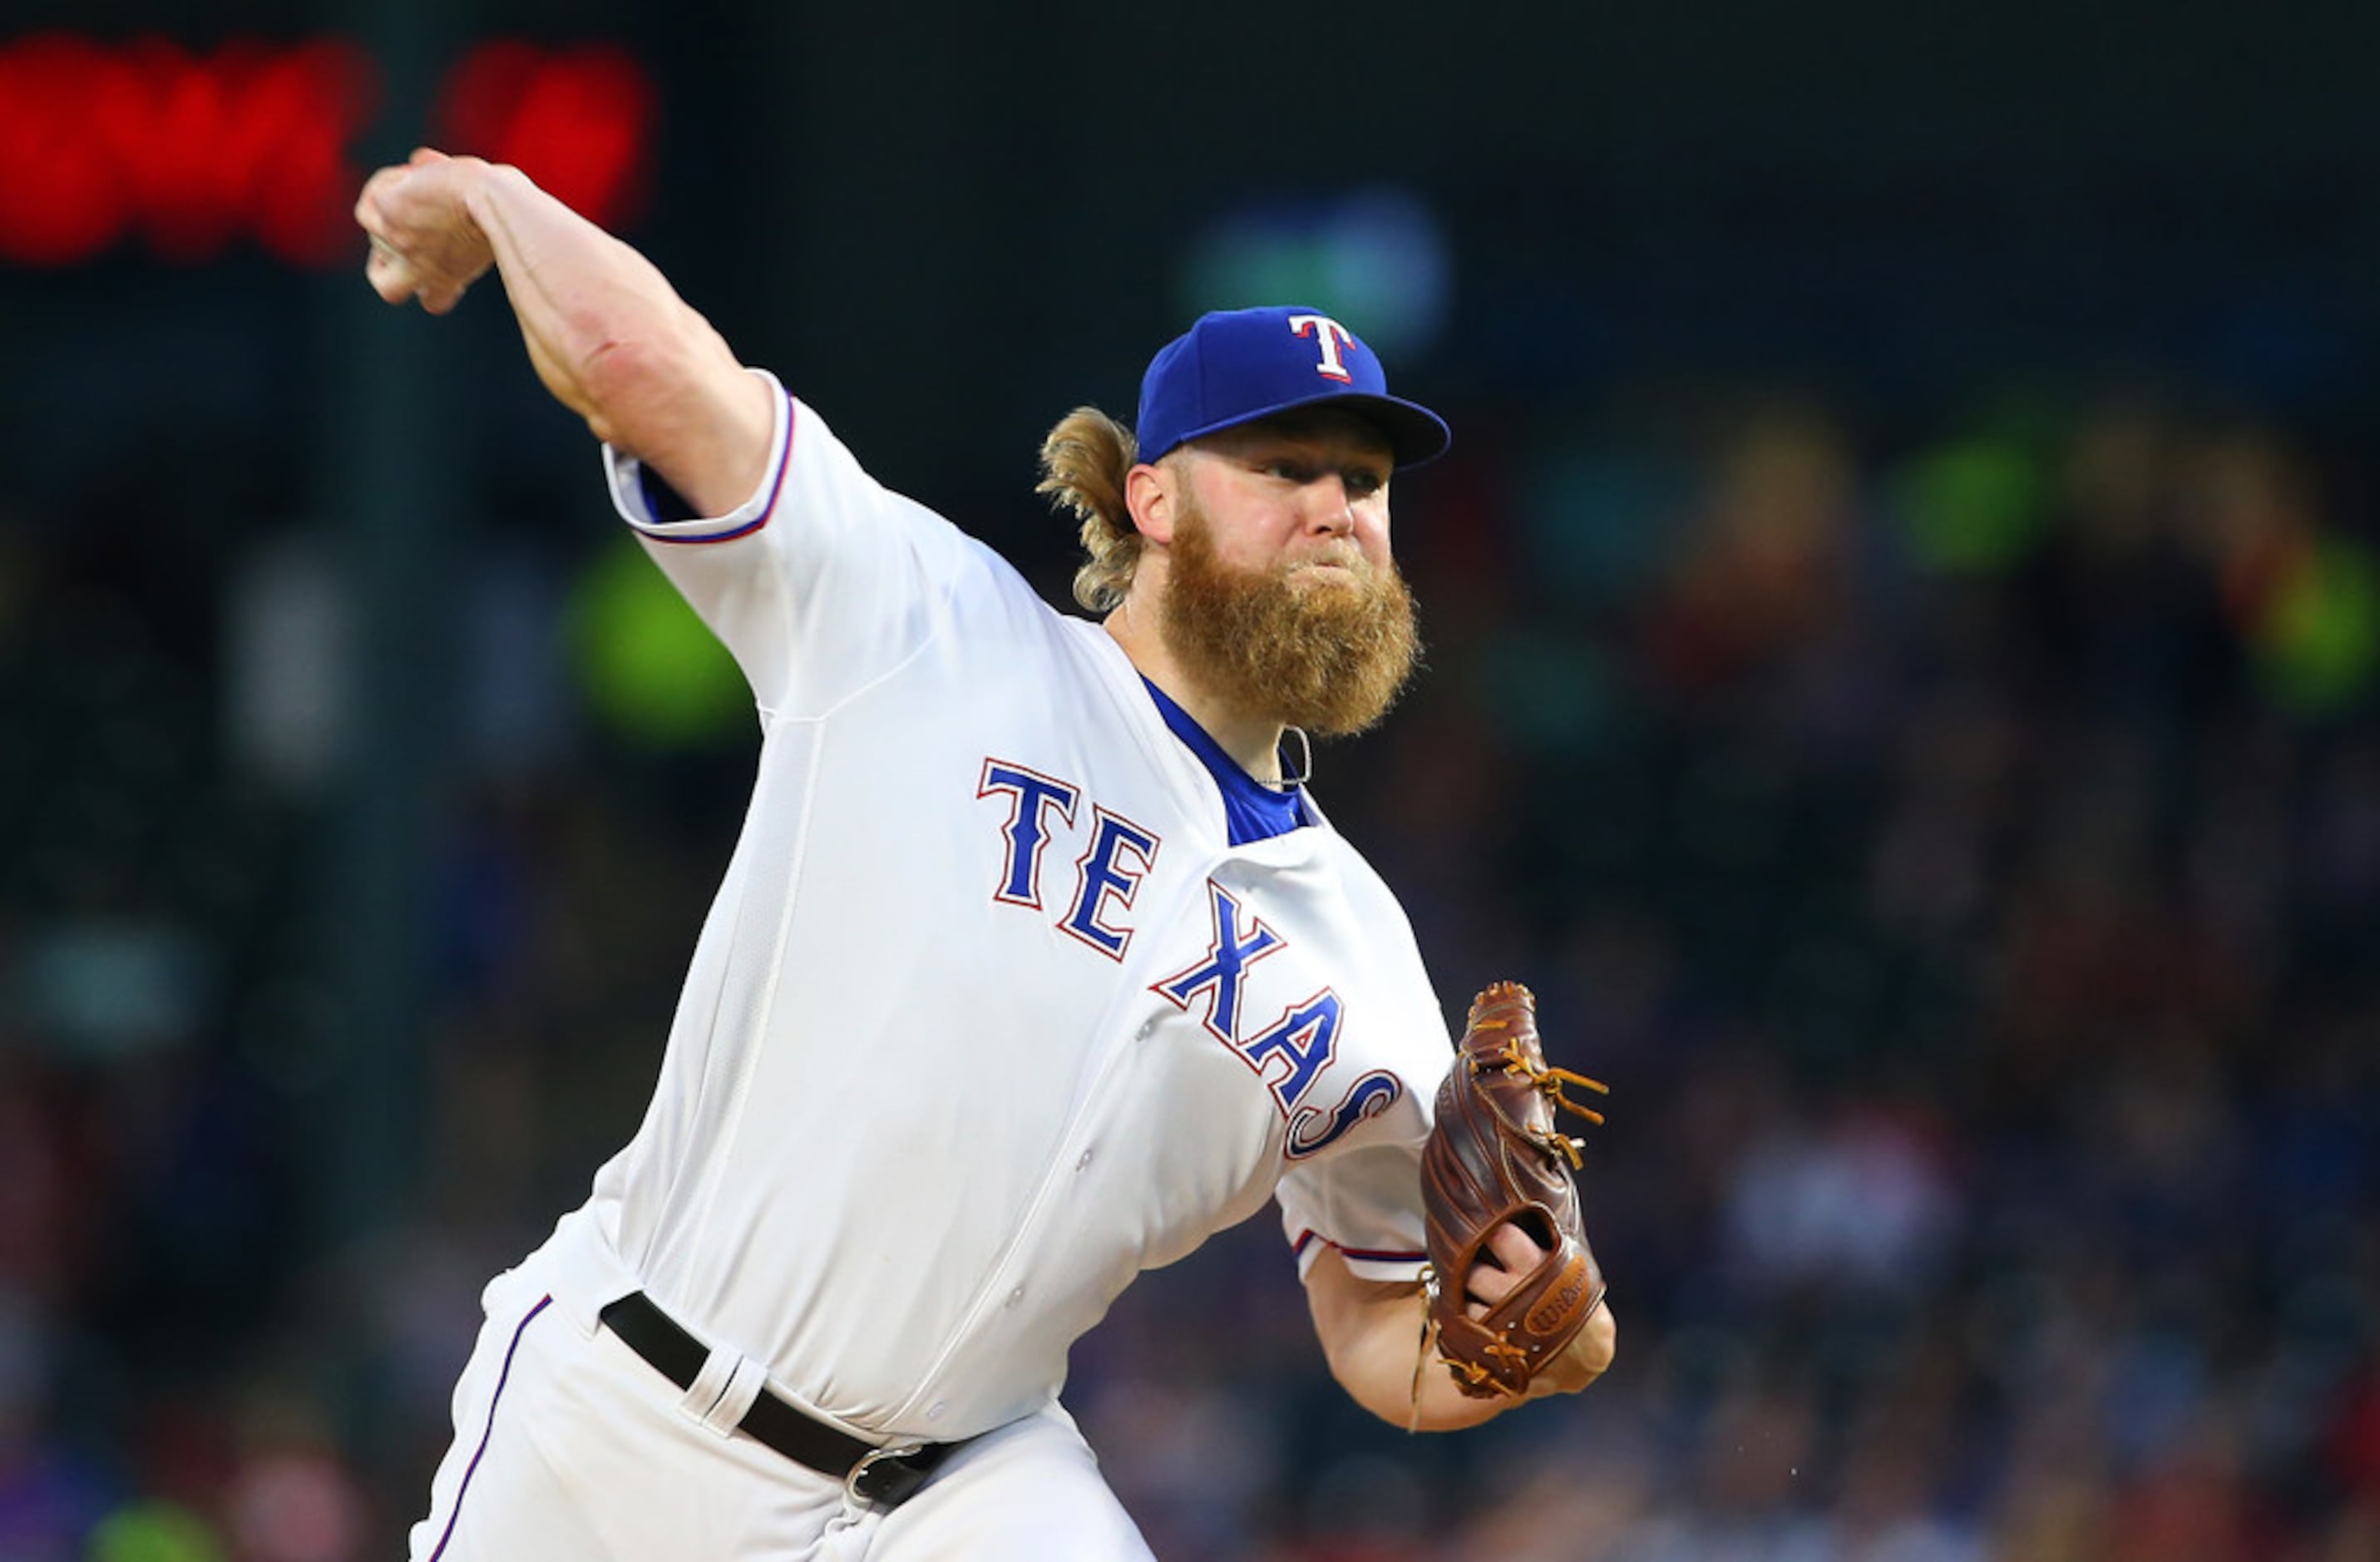 Tuesday newsletter time: Would qualifying offer be a win-win for Rangers, Martin  Perez? - Jeff Wilson's Texas Rangers Today